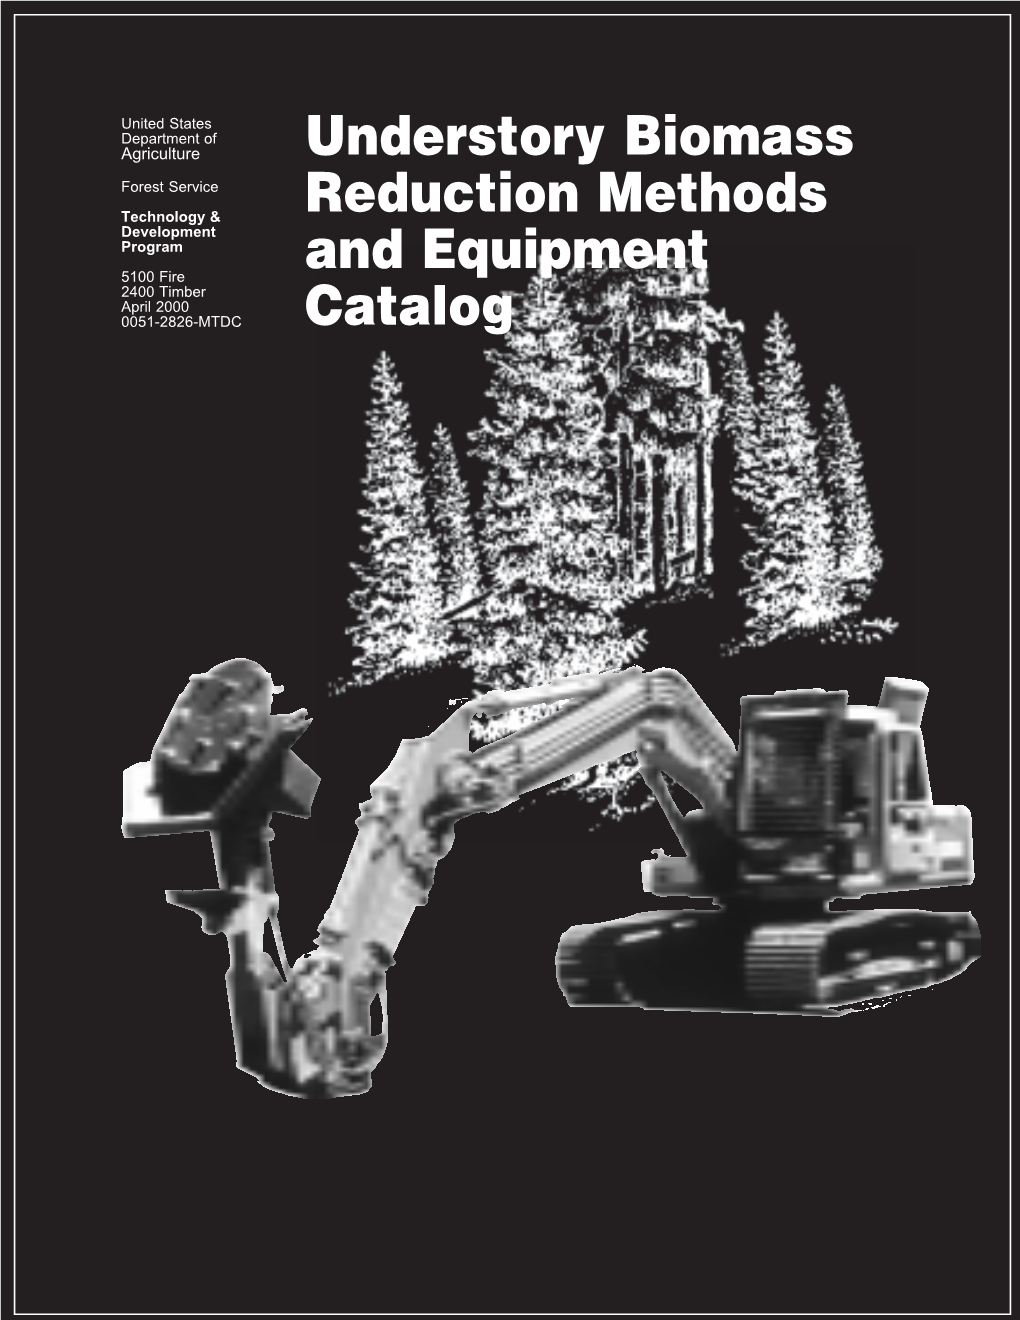 Understory Biomass Reduction Methods and Equipment (0051-2828- MTDC) Does Not Include the 137-Page Catalog of Machines and Specialized Equipment